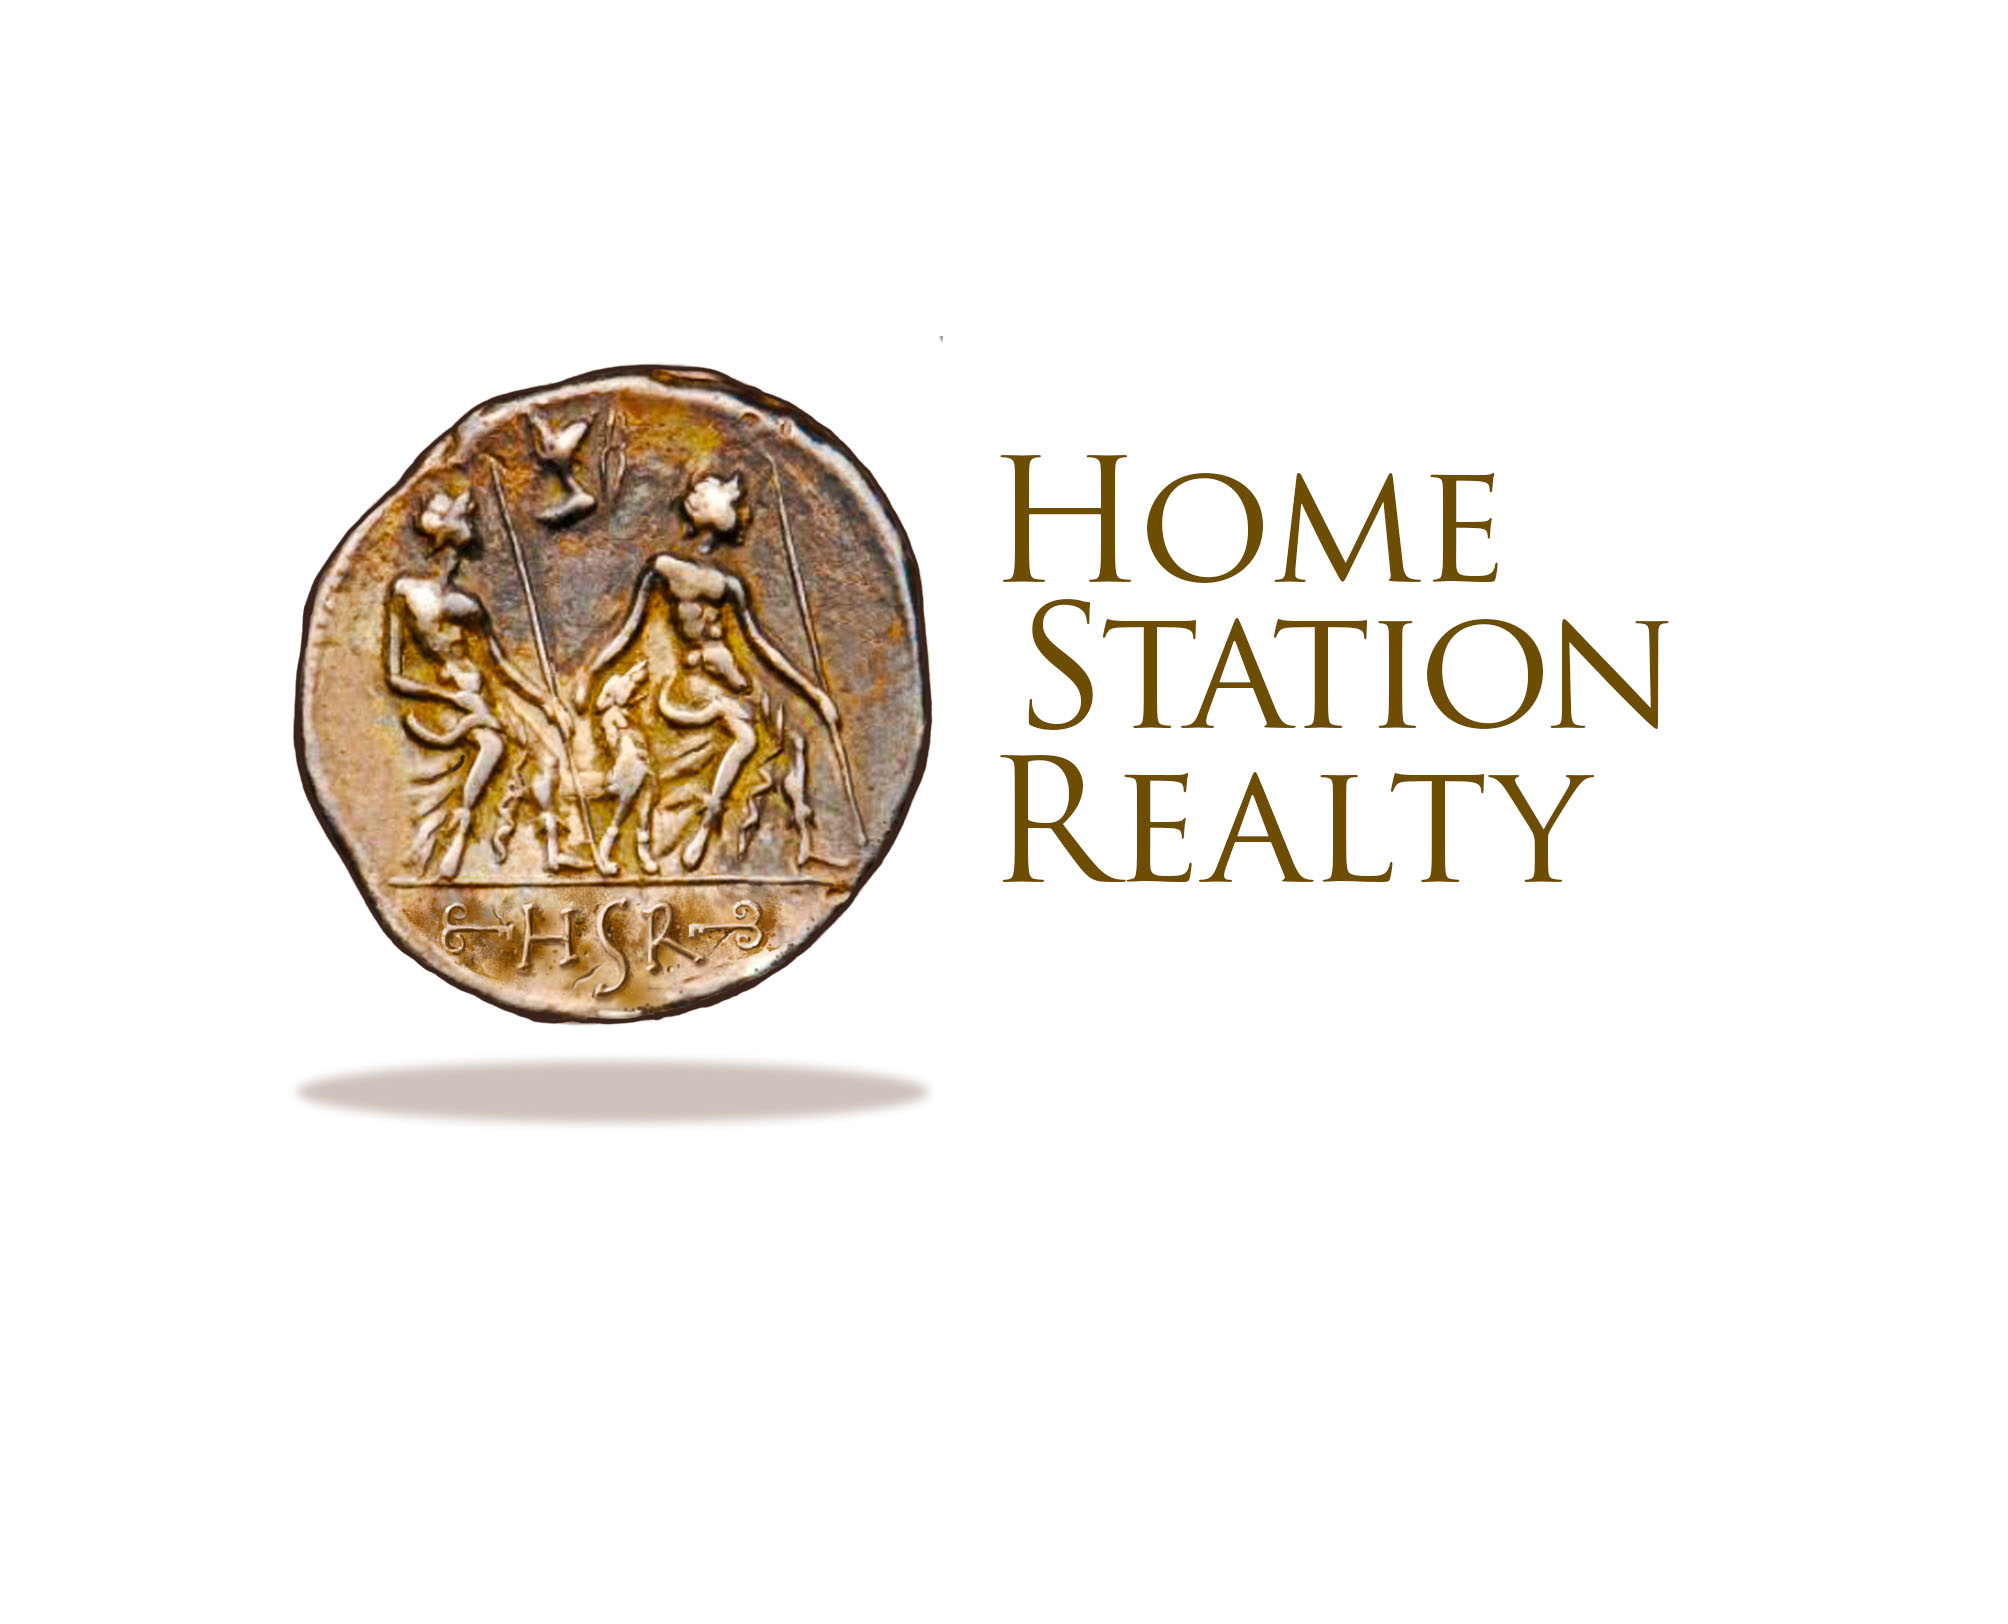 Home Station Realty